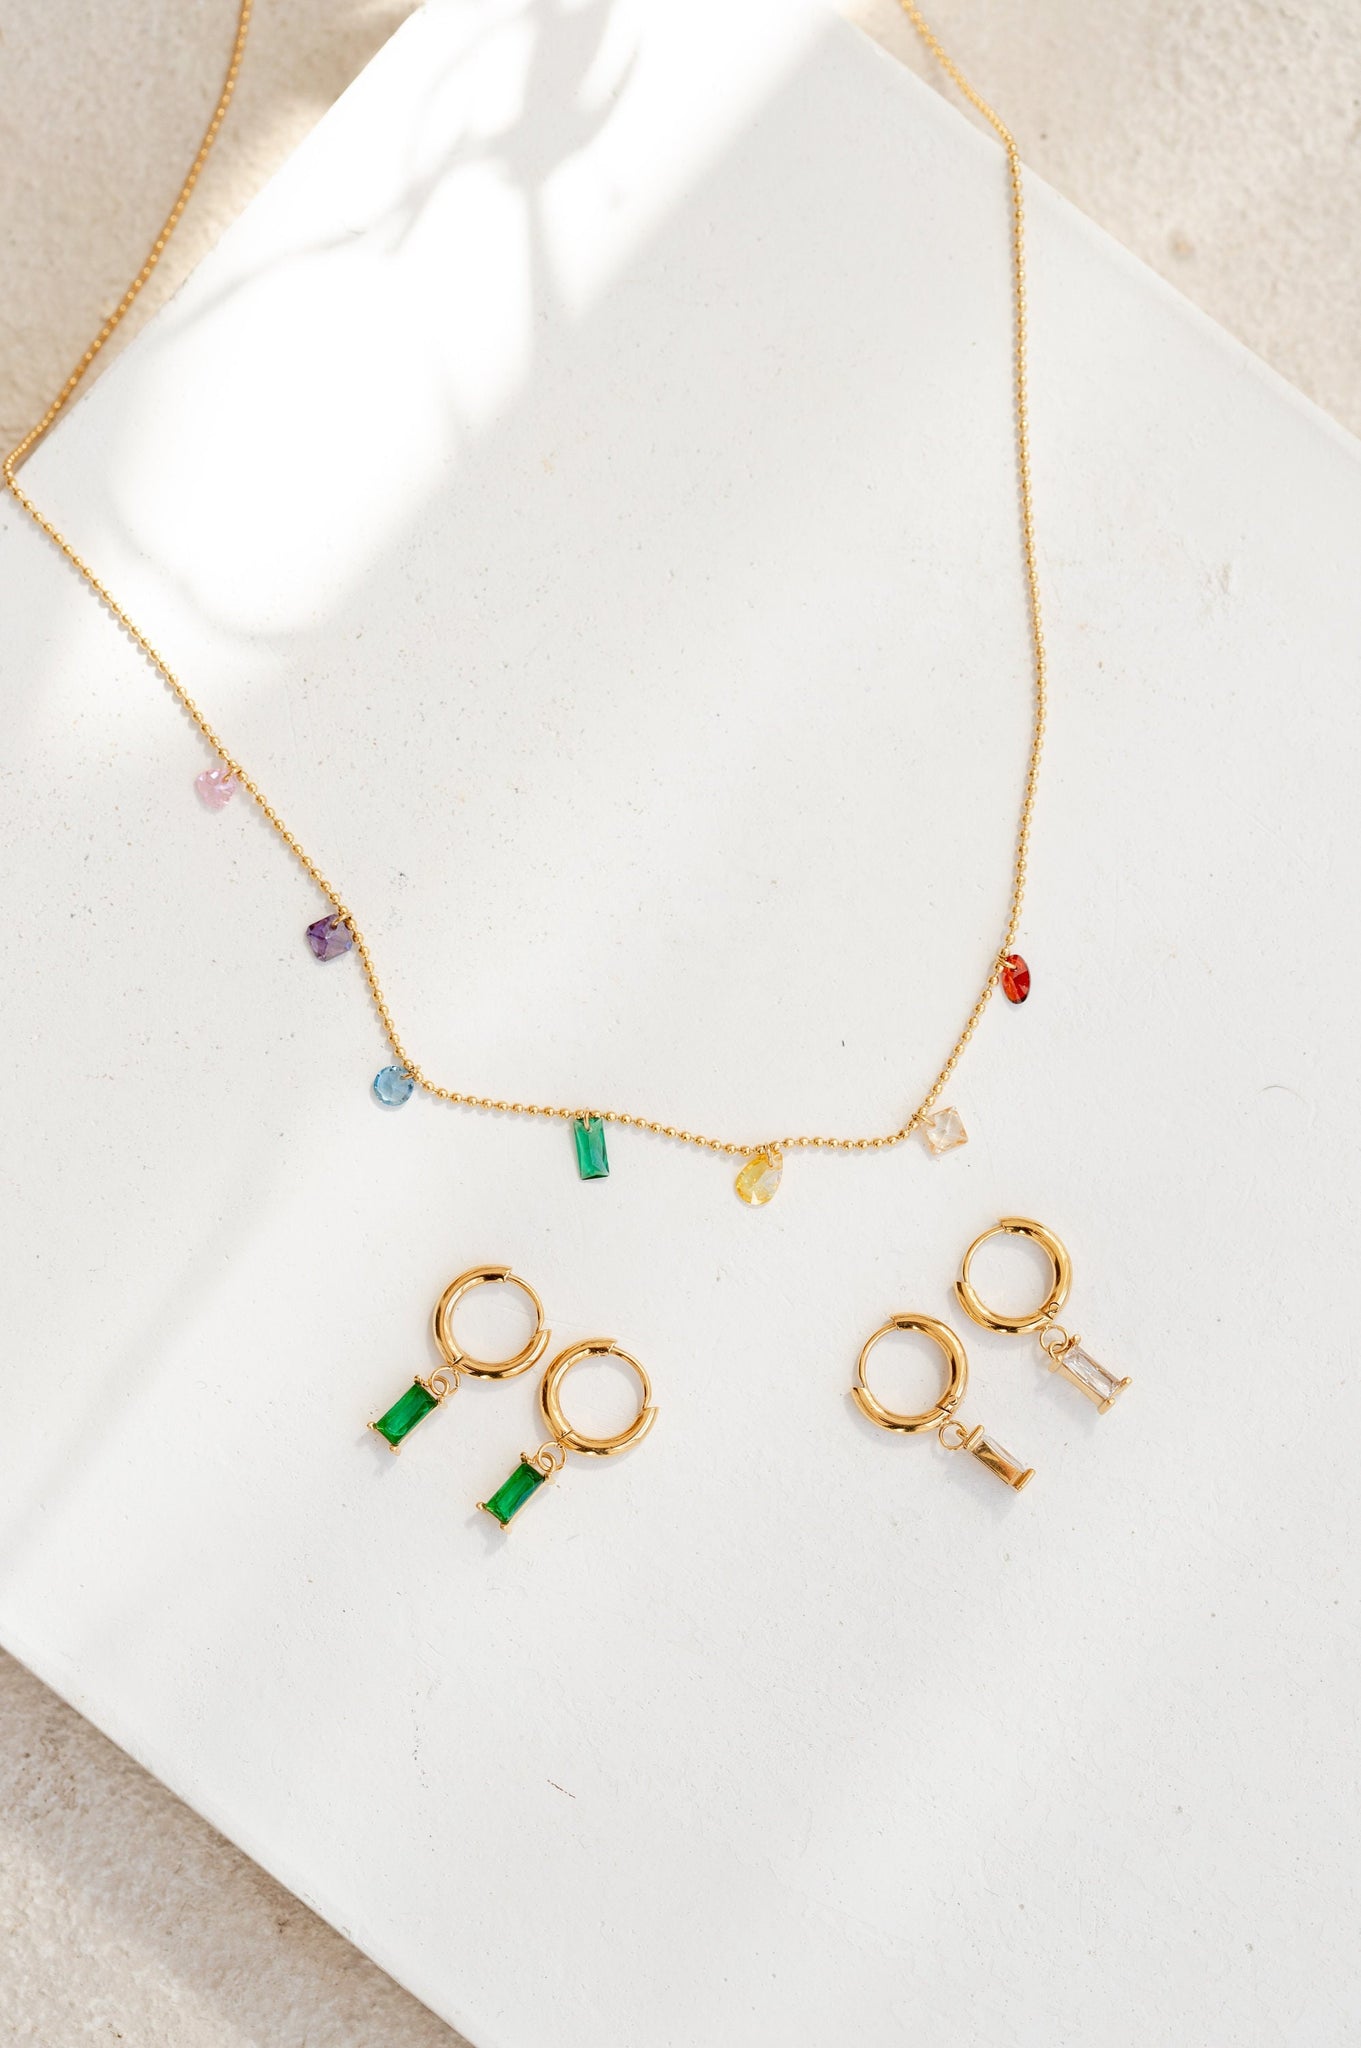 Rainbow Stone Necklace, 18K Gold, Link Charm Necklace, Mama Necklace, Gemstone Necklace, Mothers Day Gift, Delicate Necklace, Unique Jewelry